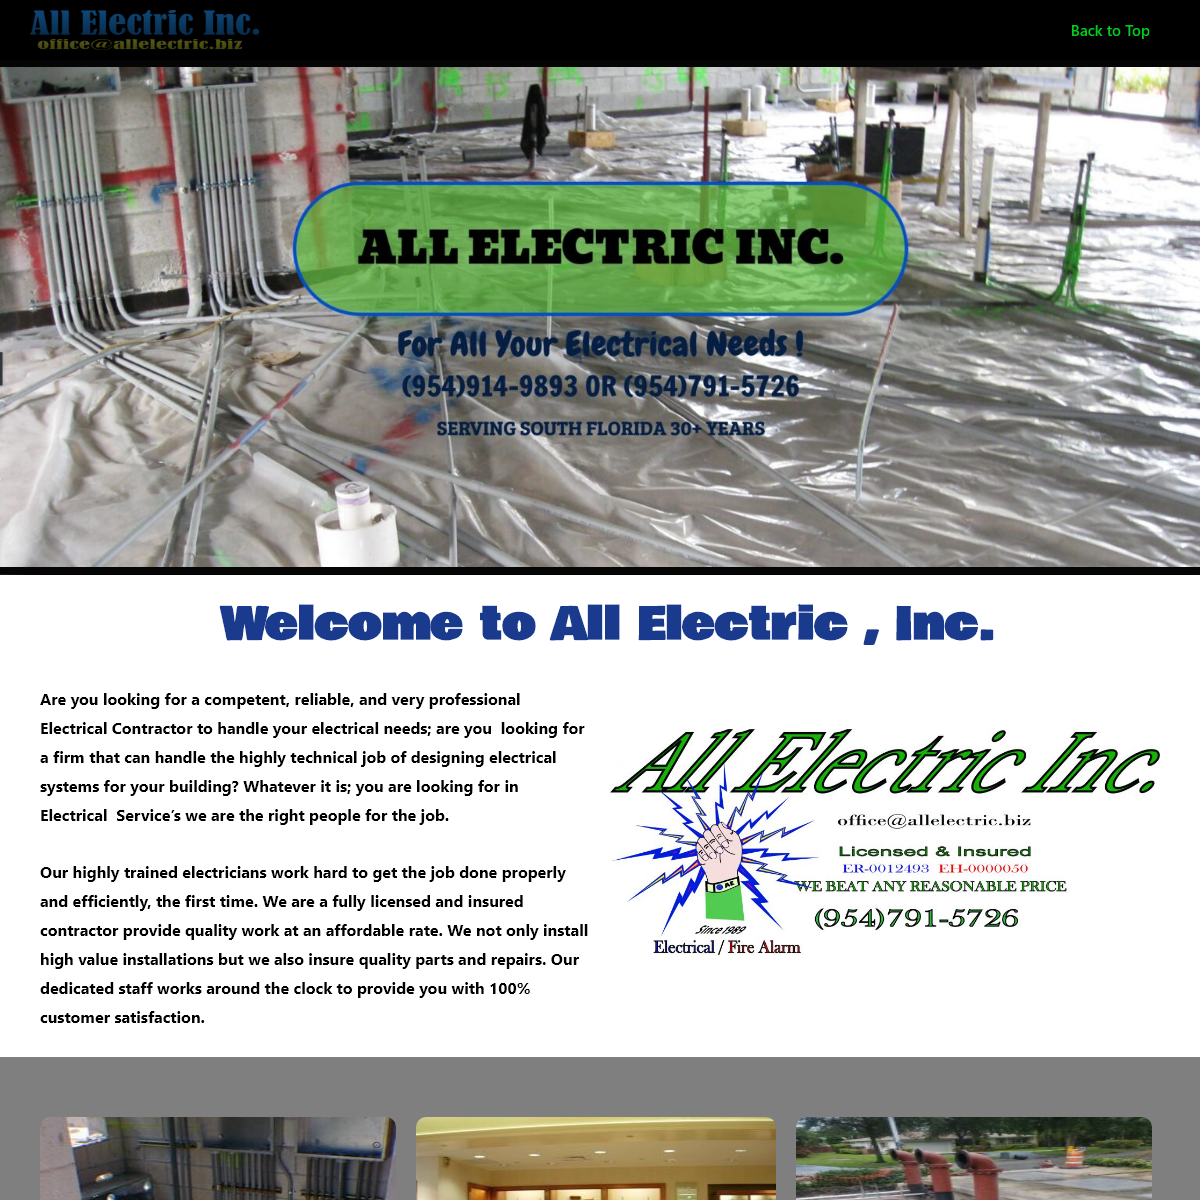 A complete backup of allelectric.biz